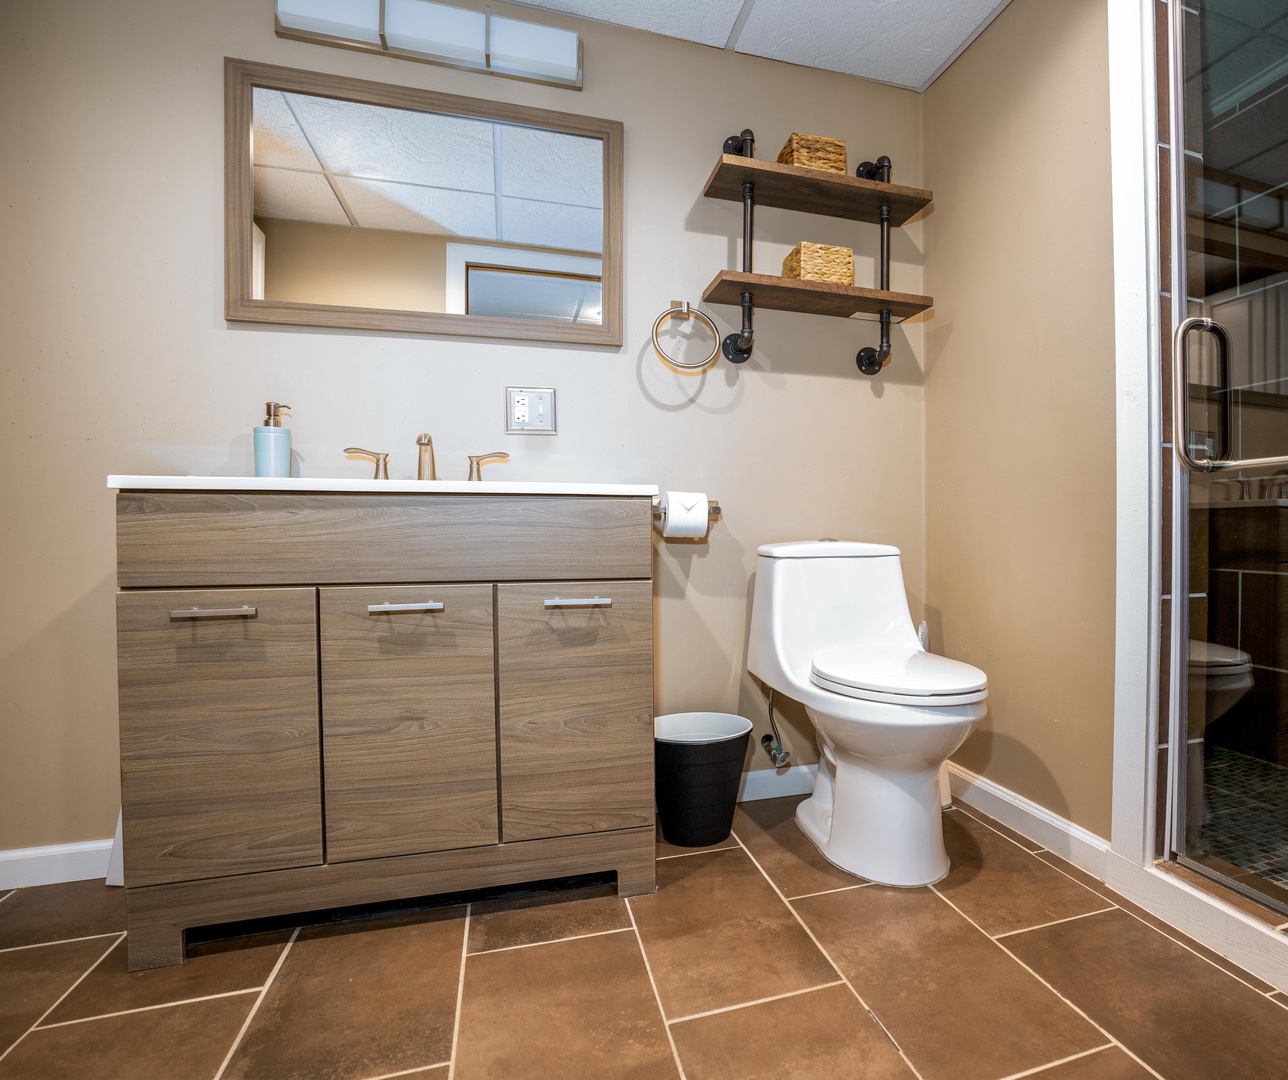 The second shared bathroom boasts a single vanity & walk in shower